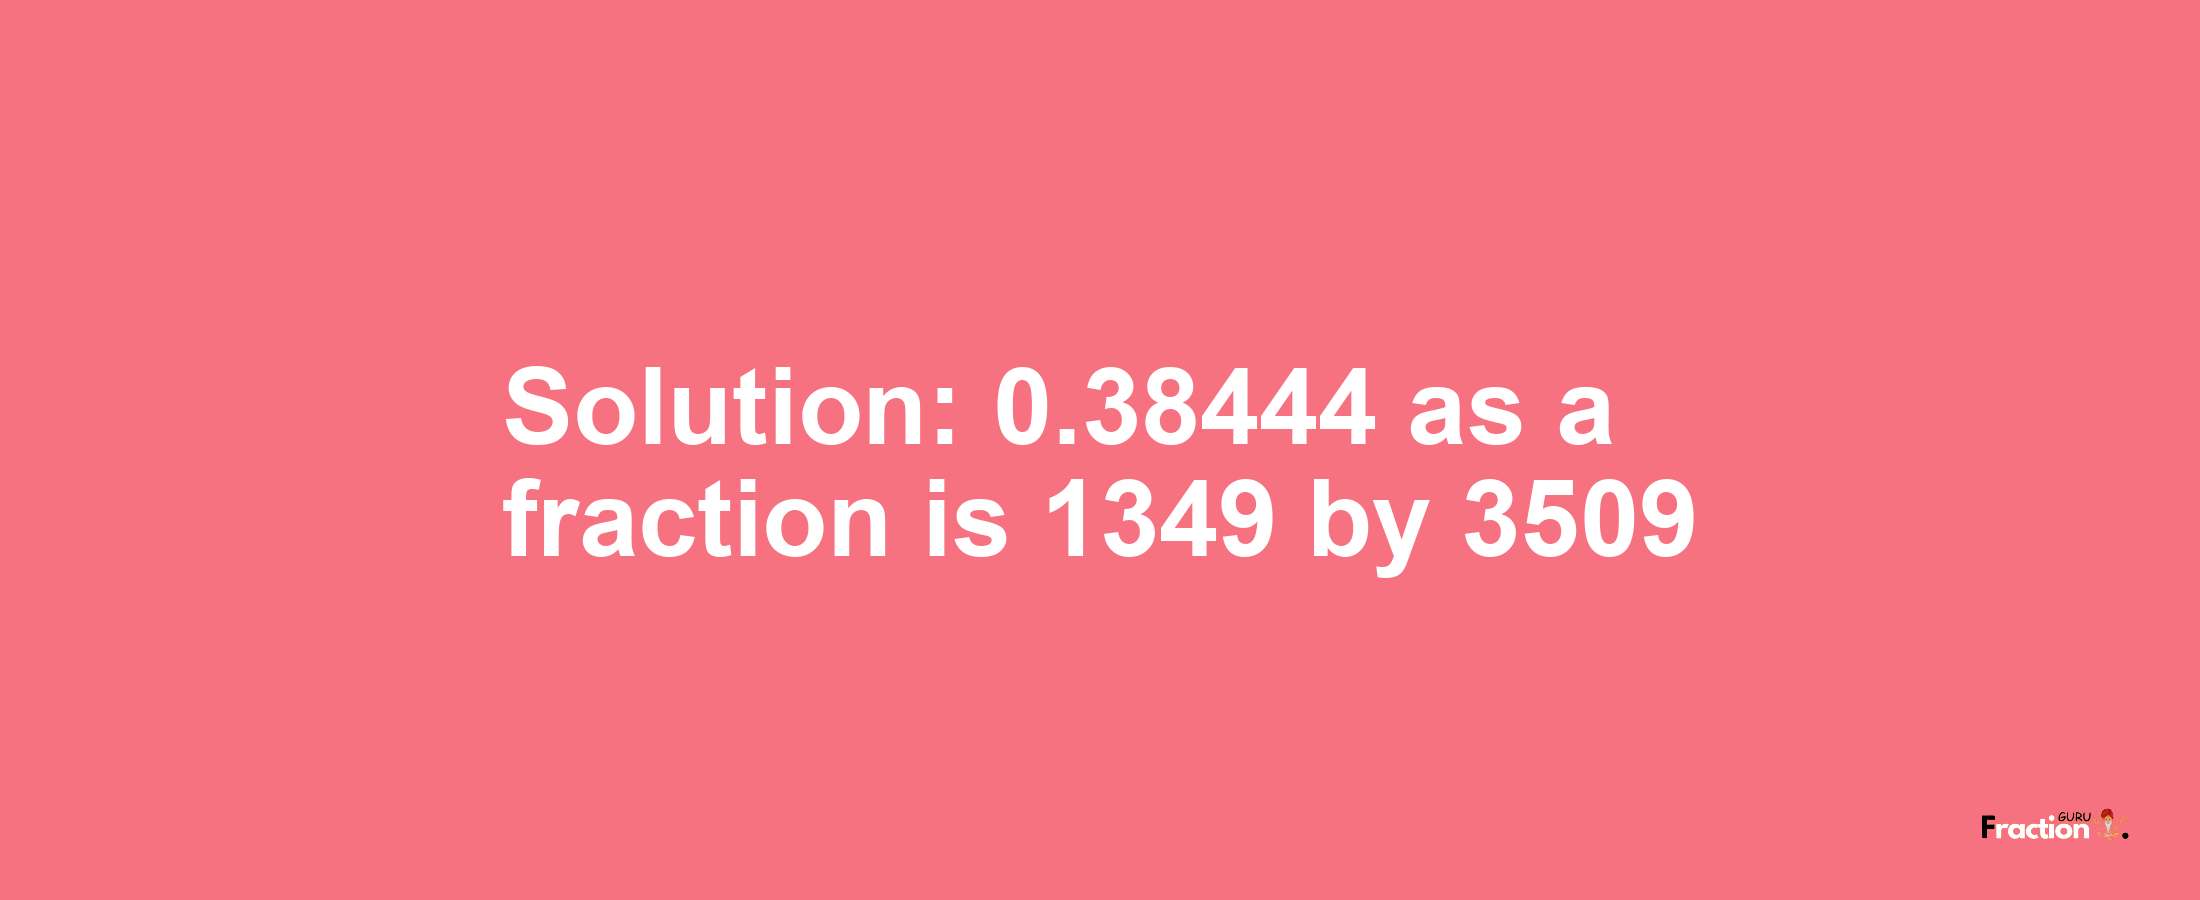 Solution:0.38444 as a fraction is 1349/3509